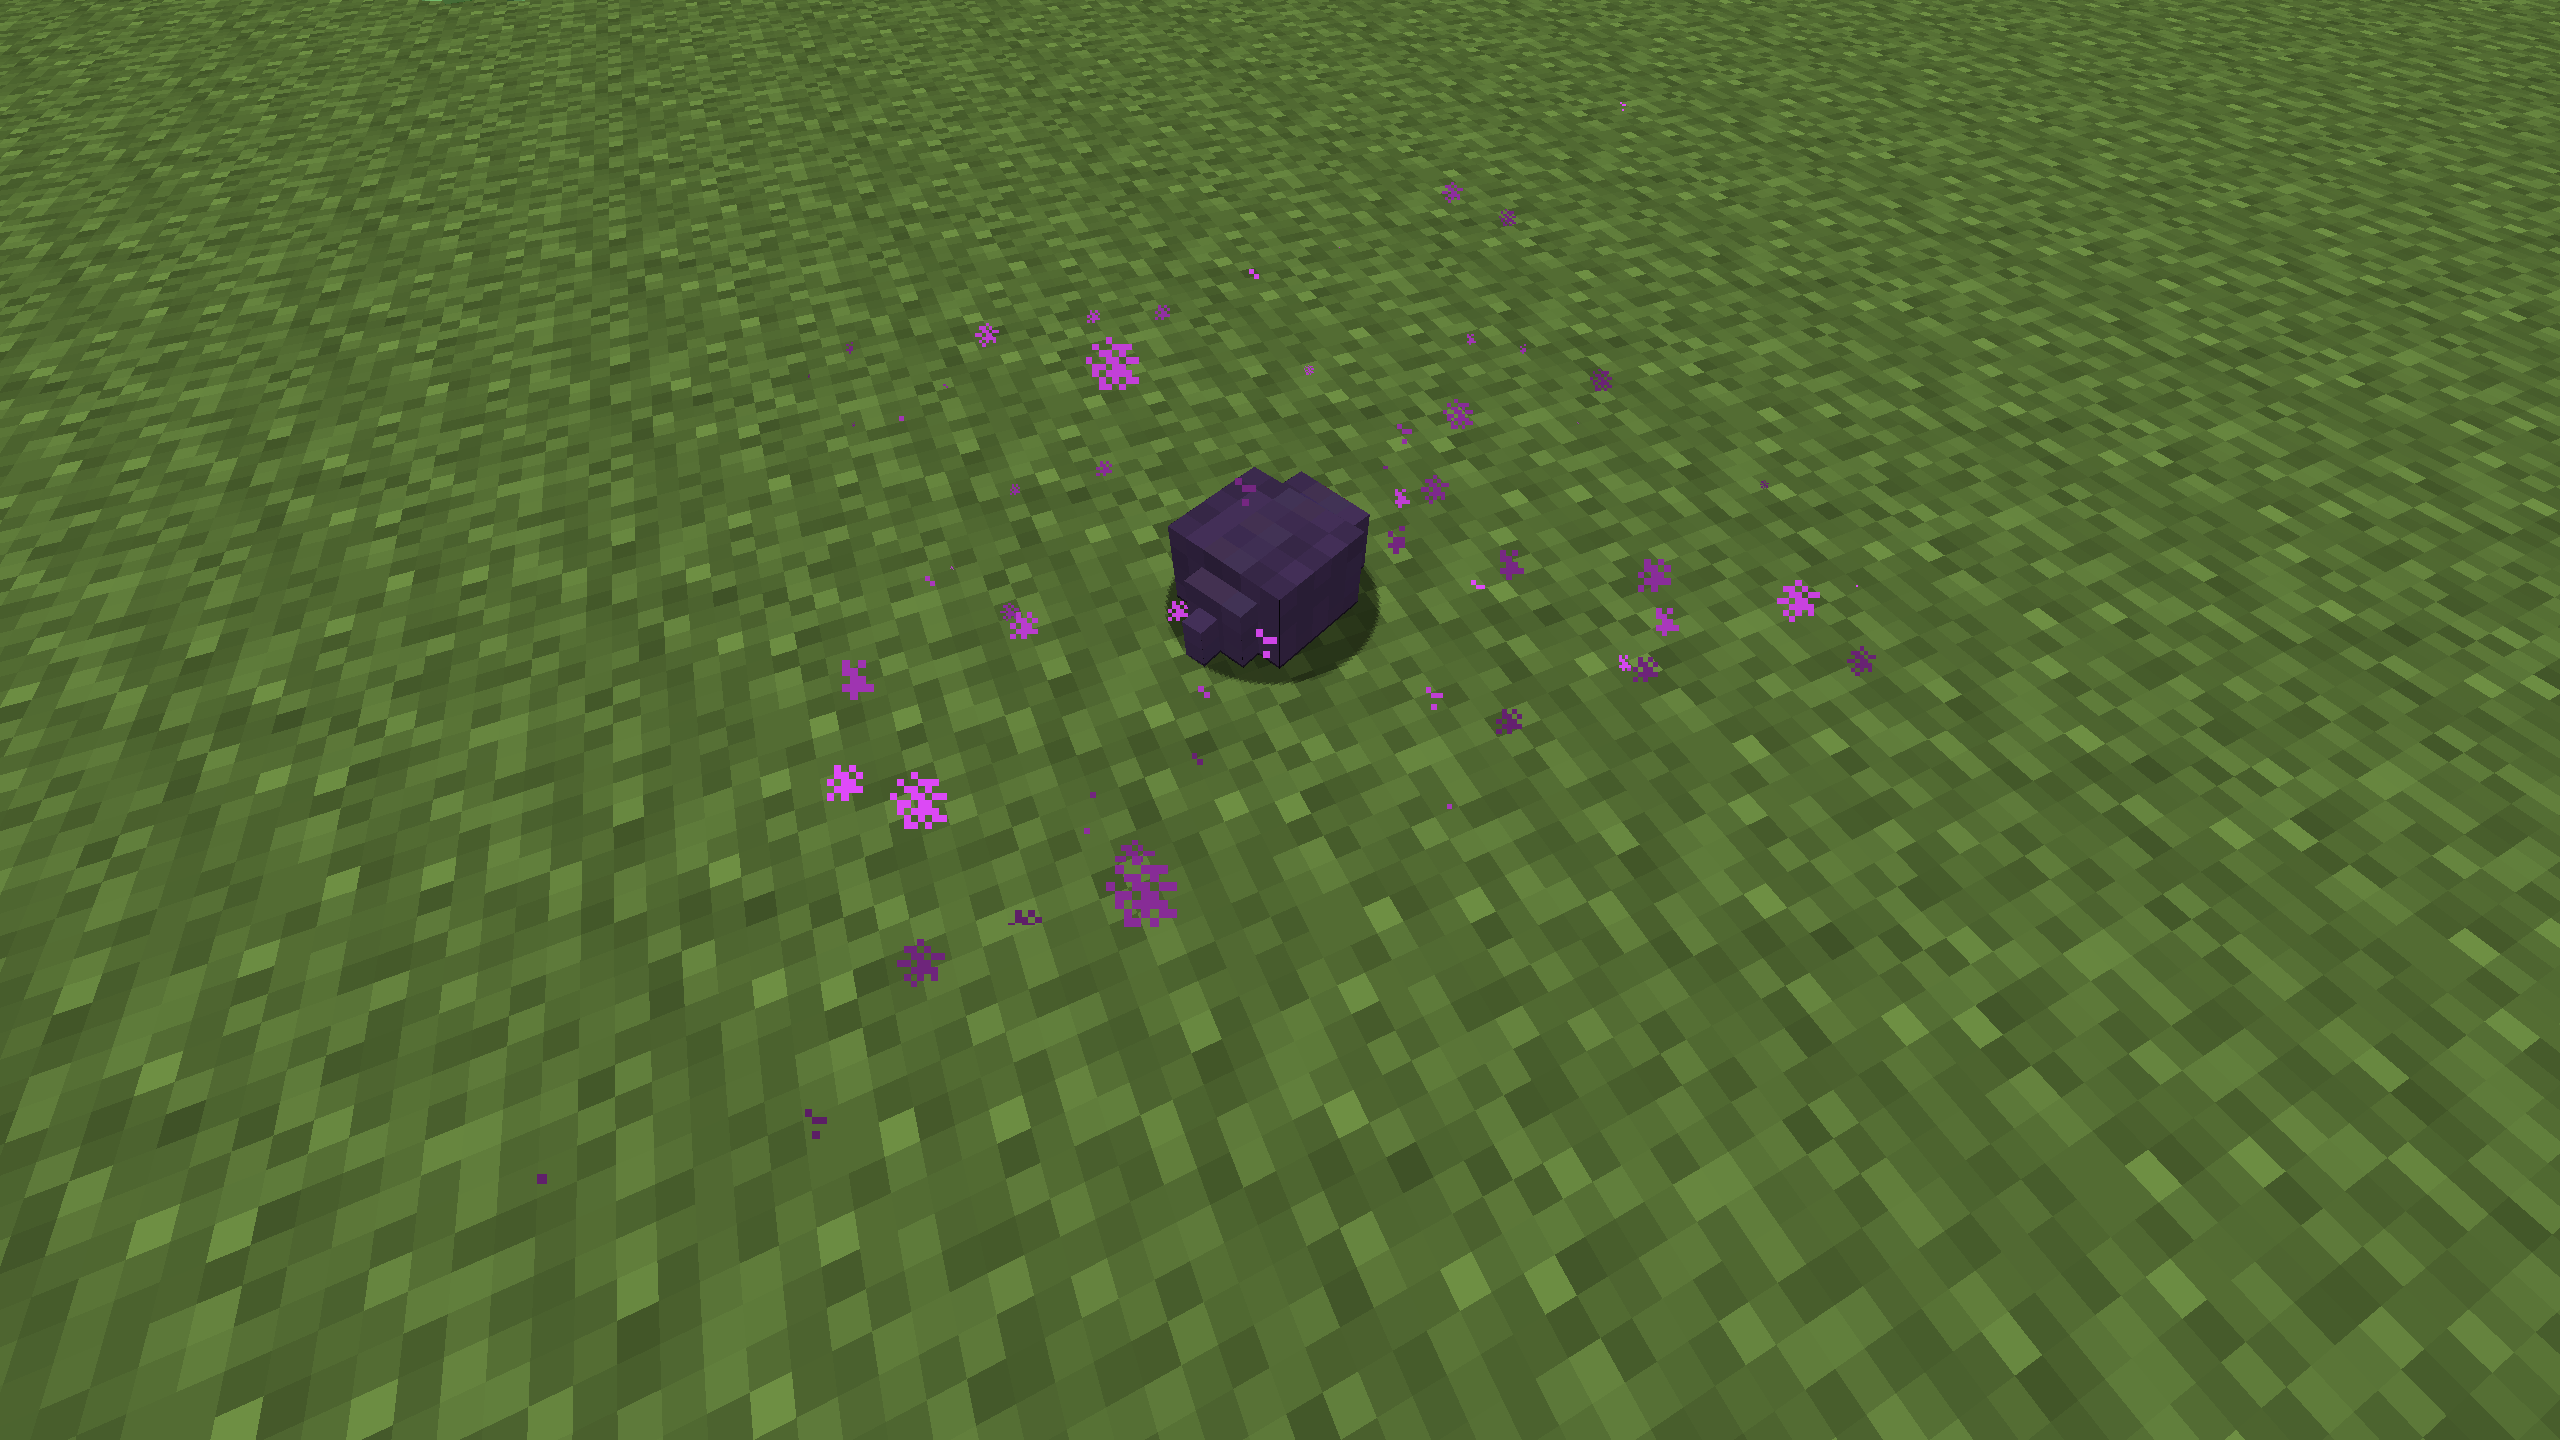 It S So Adorable New Endermite Model And Texture Recent